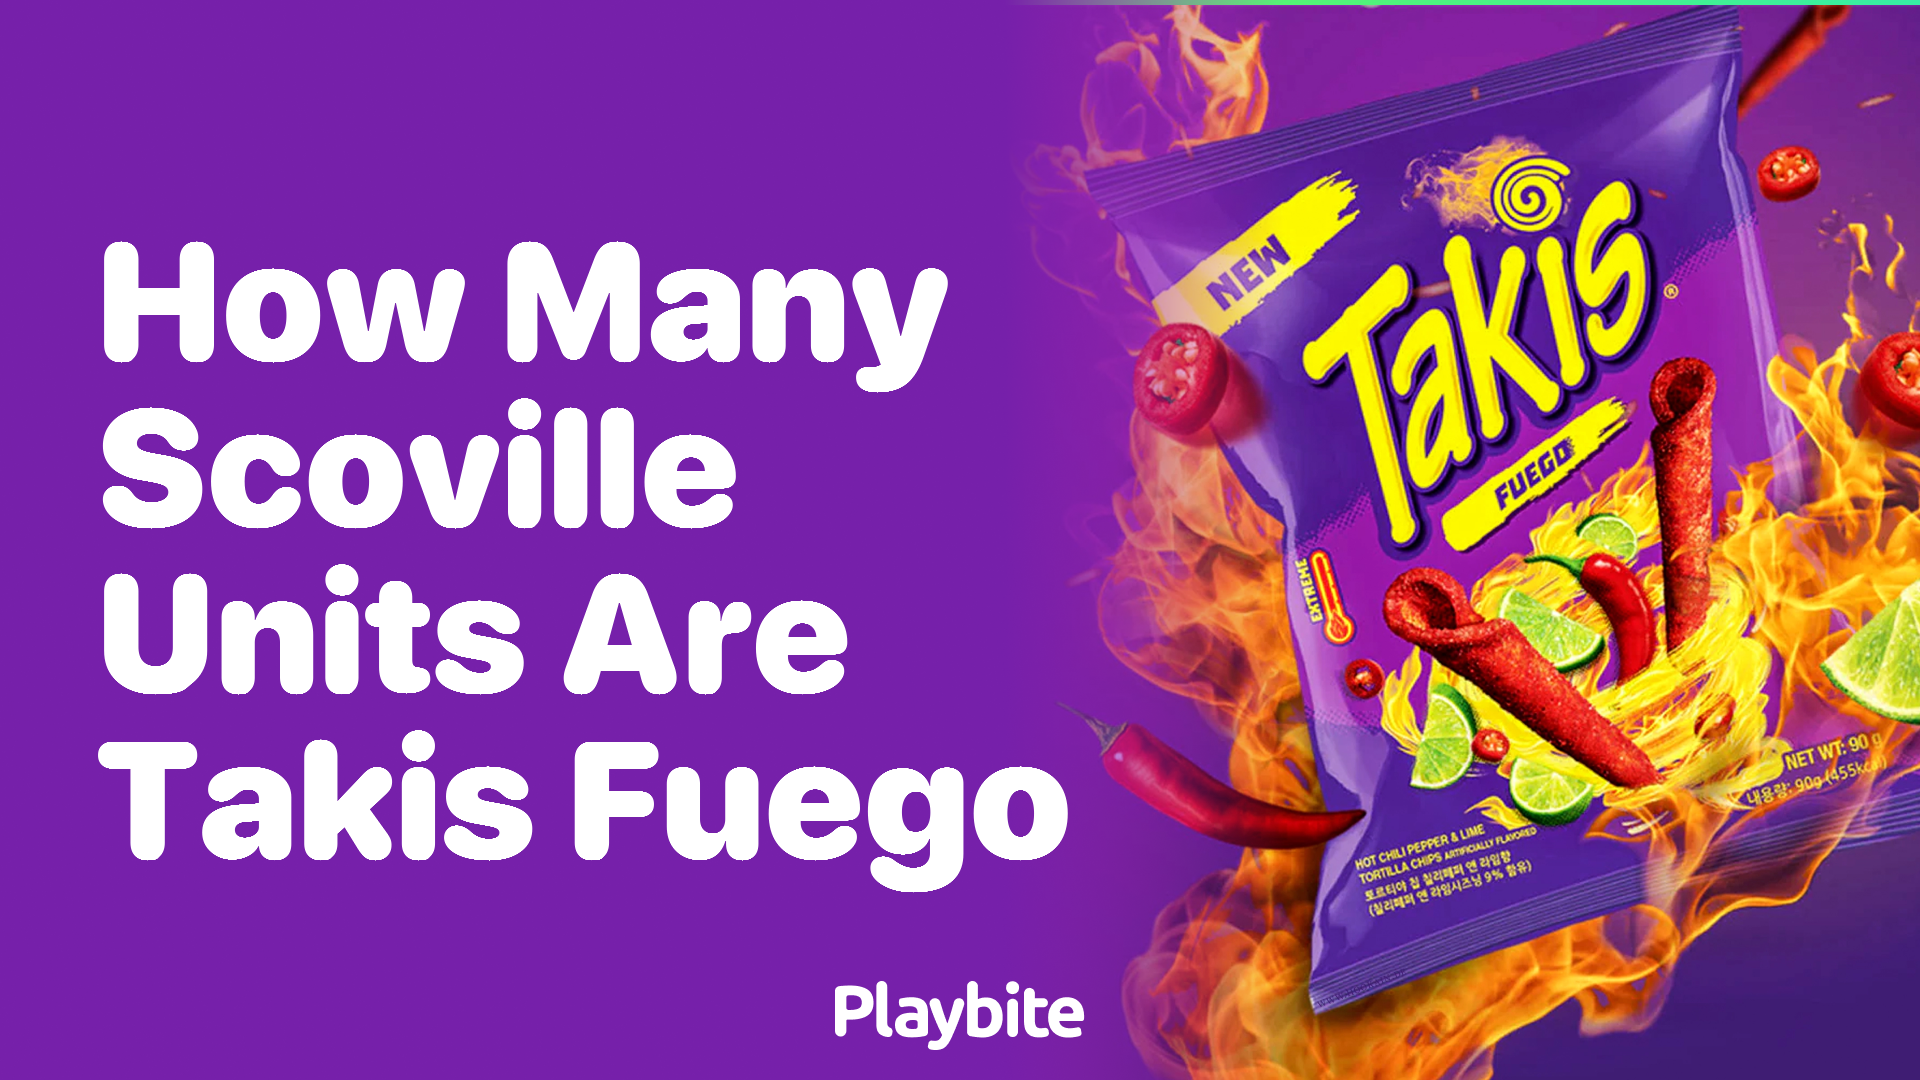 How Many Scoville Units Are Takis Fuego?